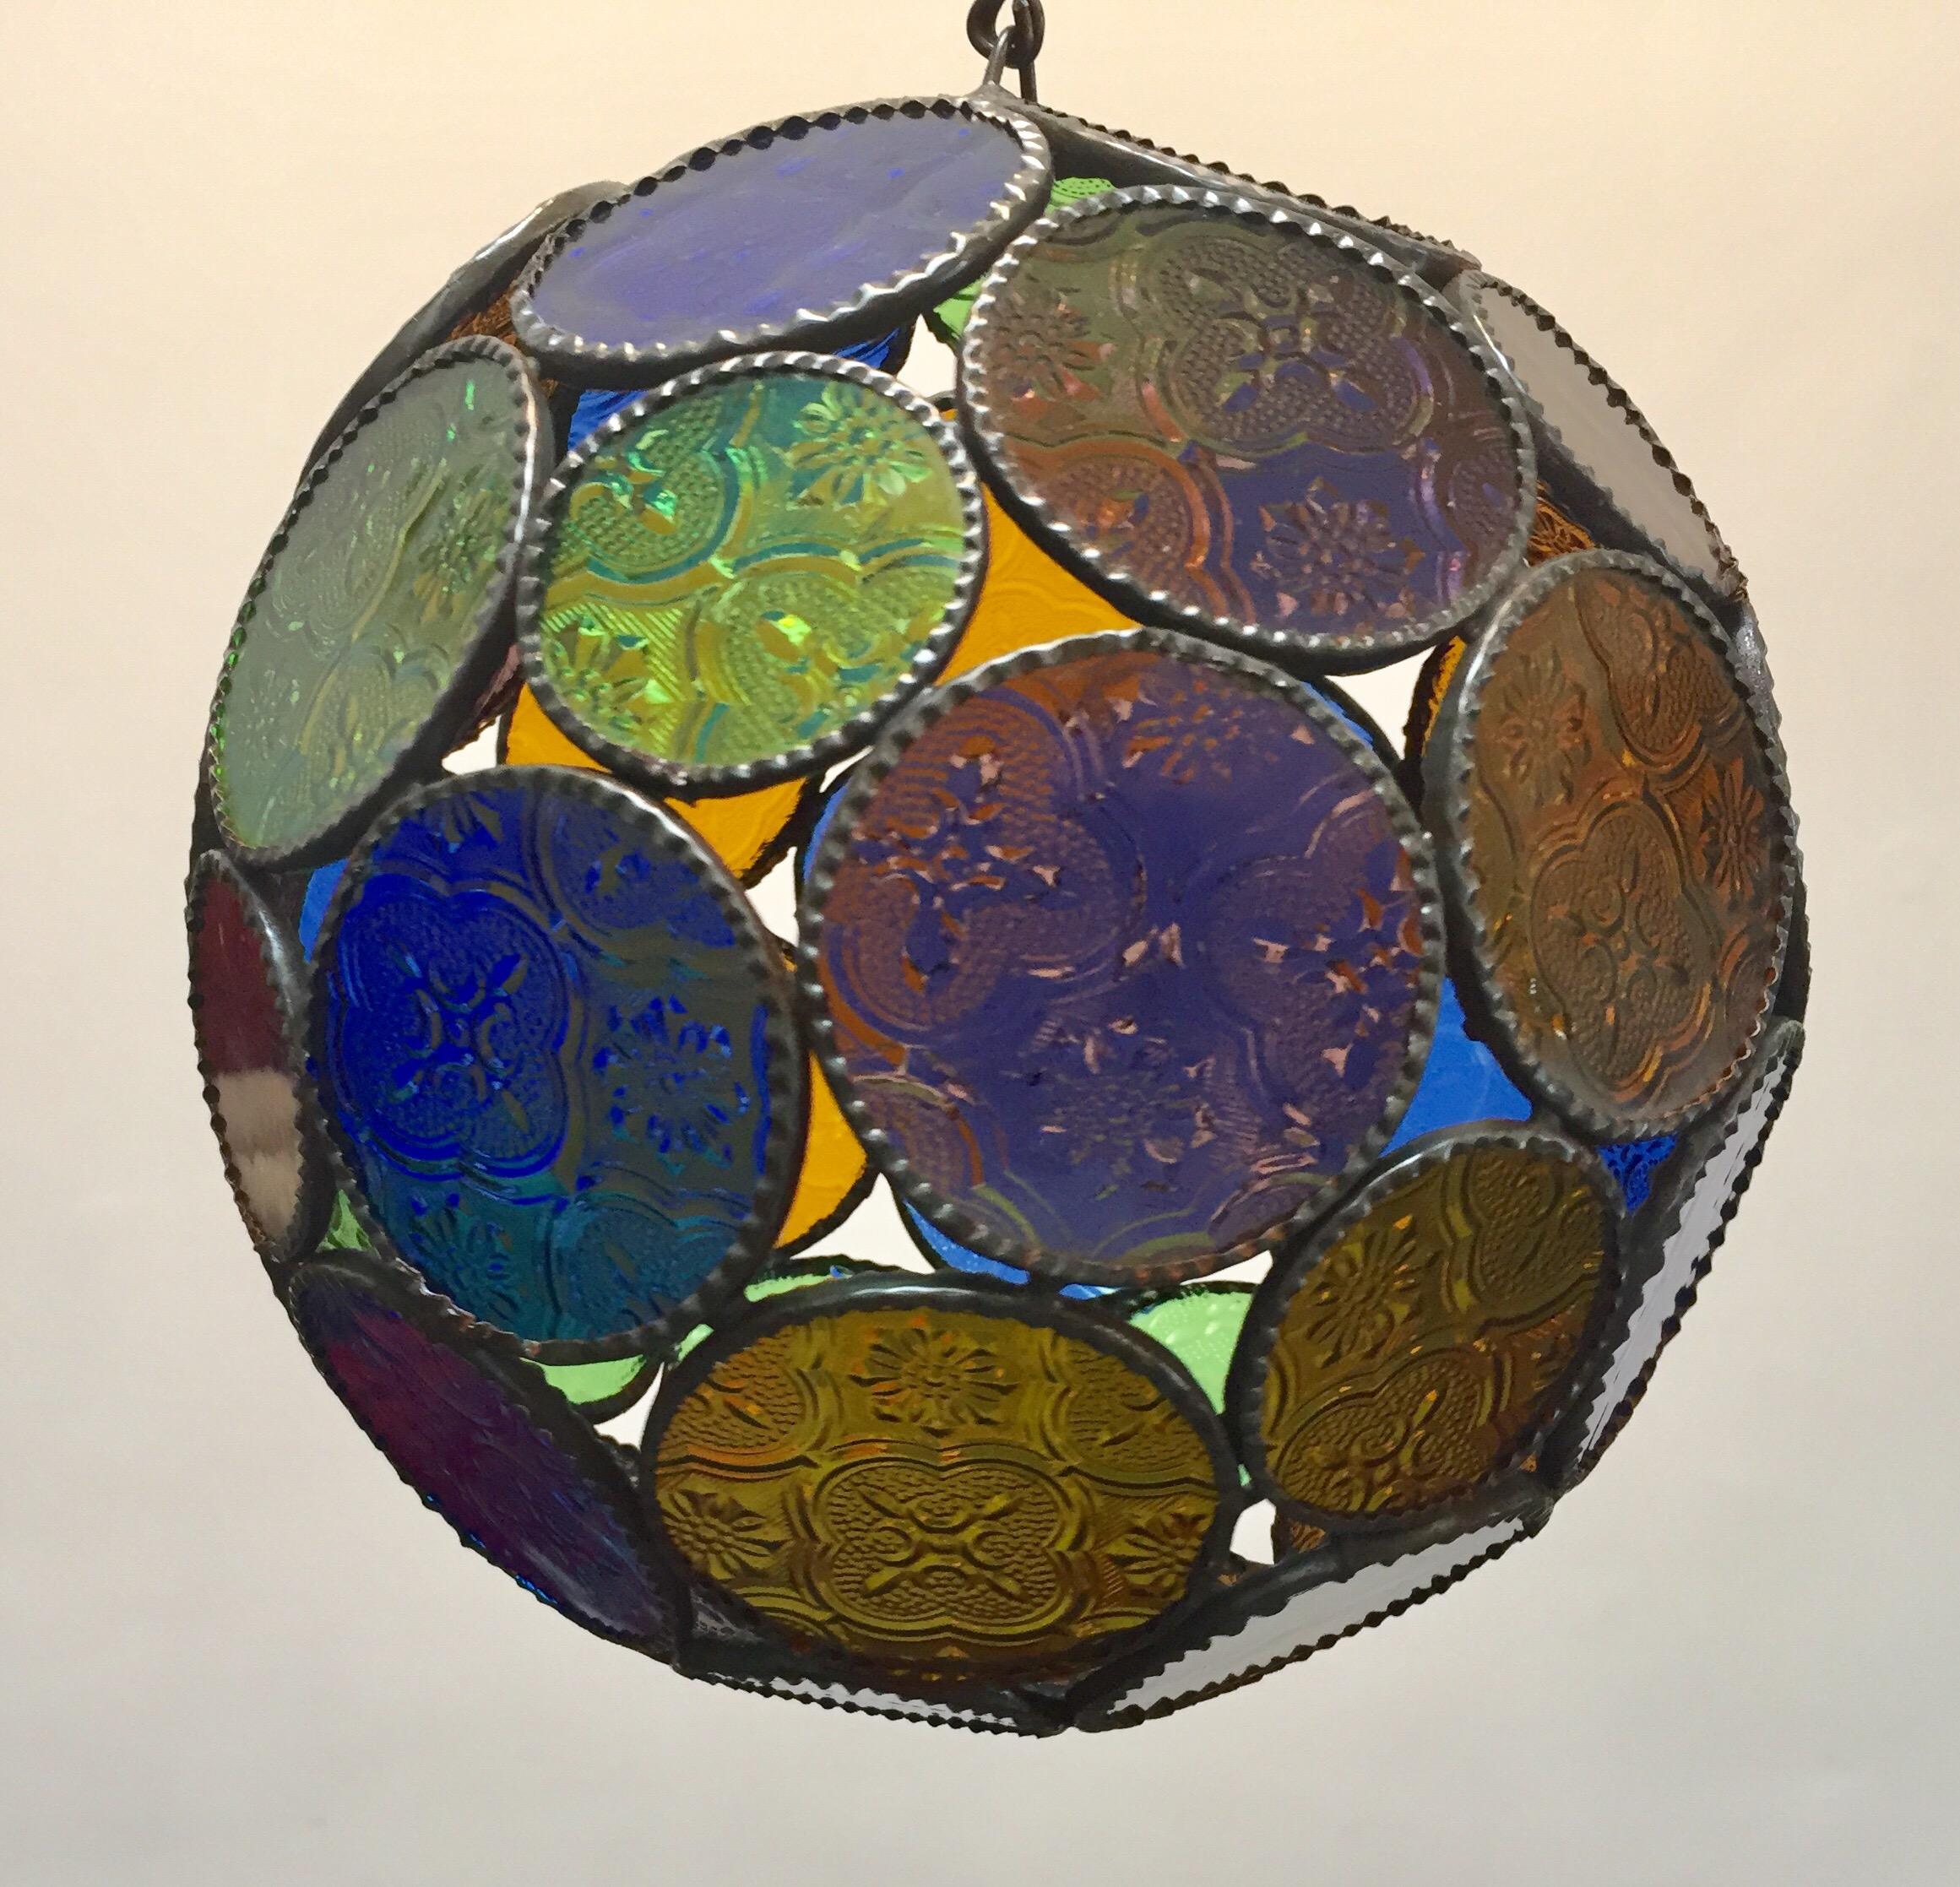 Handcrafted Moroccan Moorish Glass Orb Lantern with Multi-Color Glass In Good Condition For Sale In North Hollywood, CA